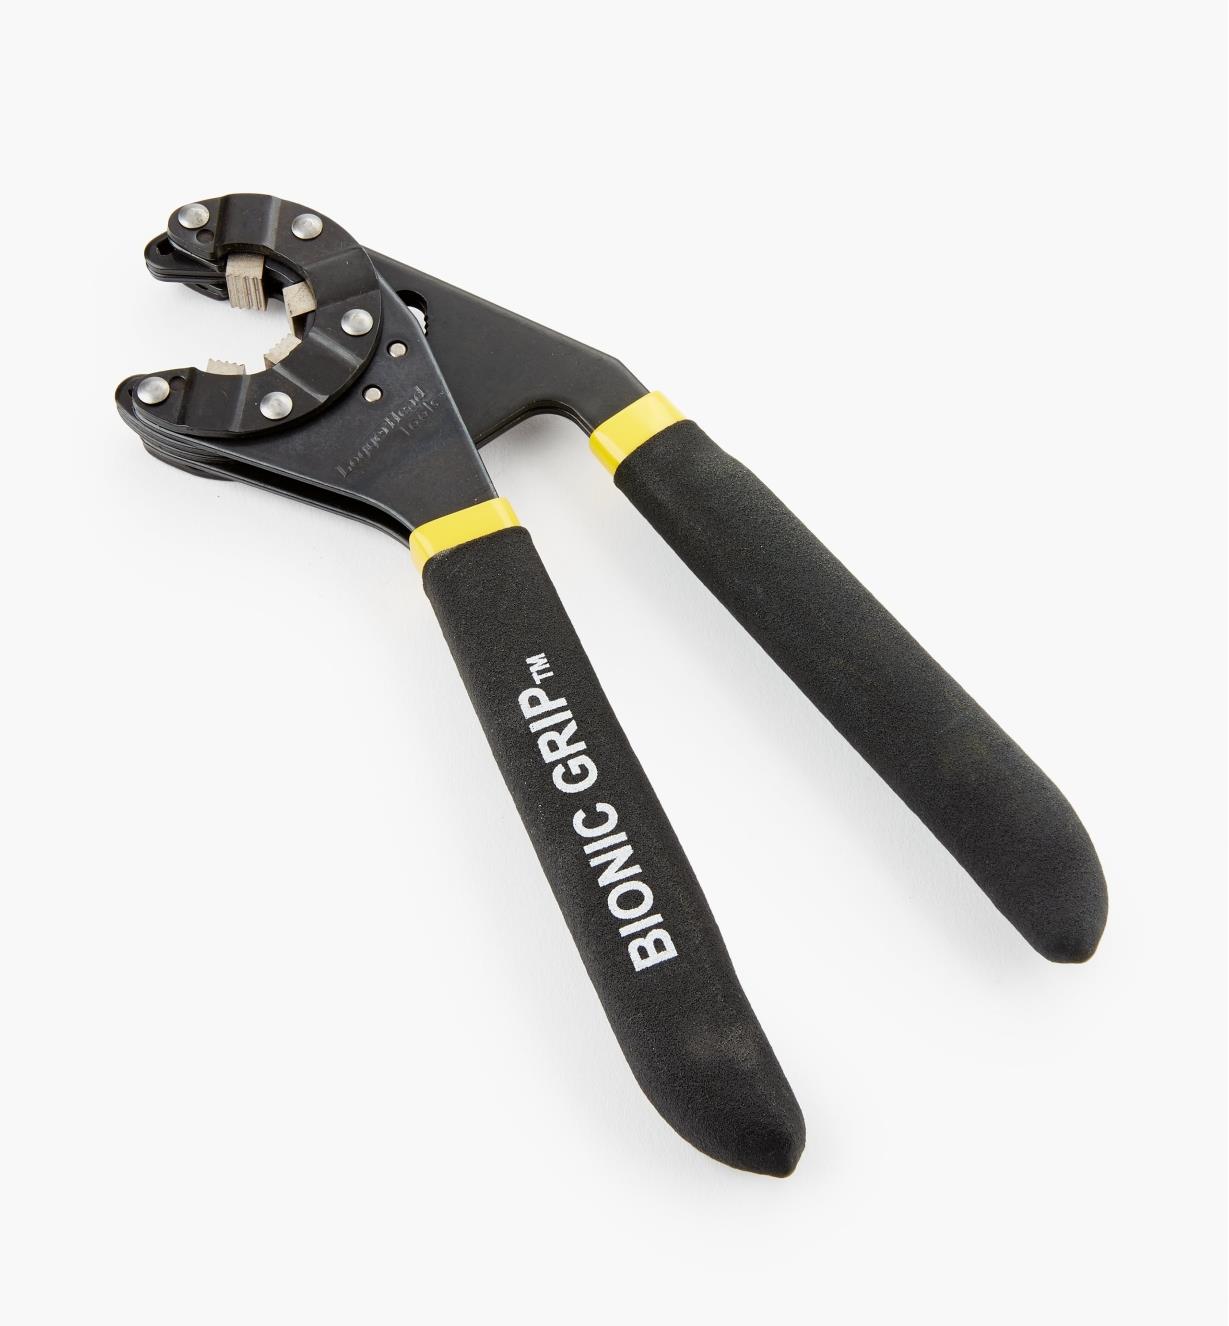 24K2008 - Large Bionic Grip Wrench